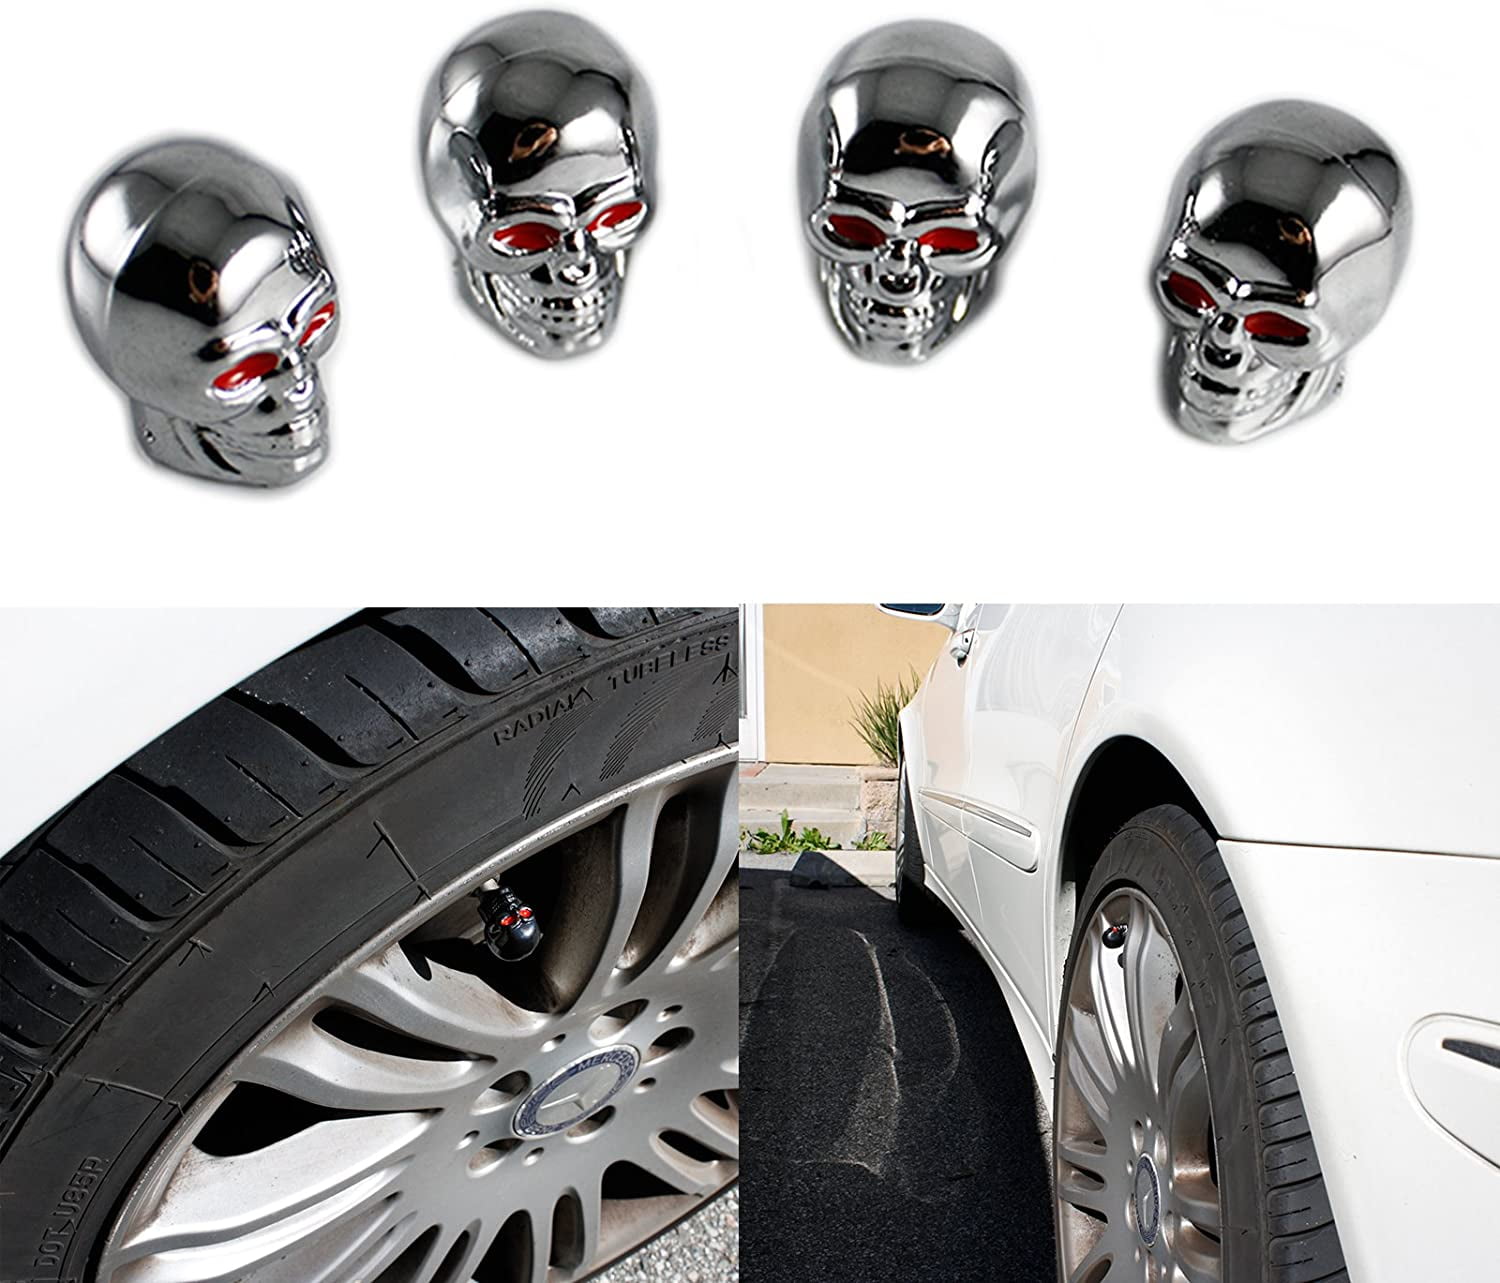 Blue Abfer Skull Valve Stem Caps Car Wheel Air Cover Tire Dust Cap Decorative Accessories Fit Most Vehicle Truck Motorcycles Bikes 